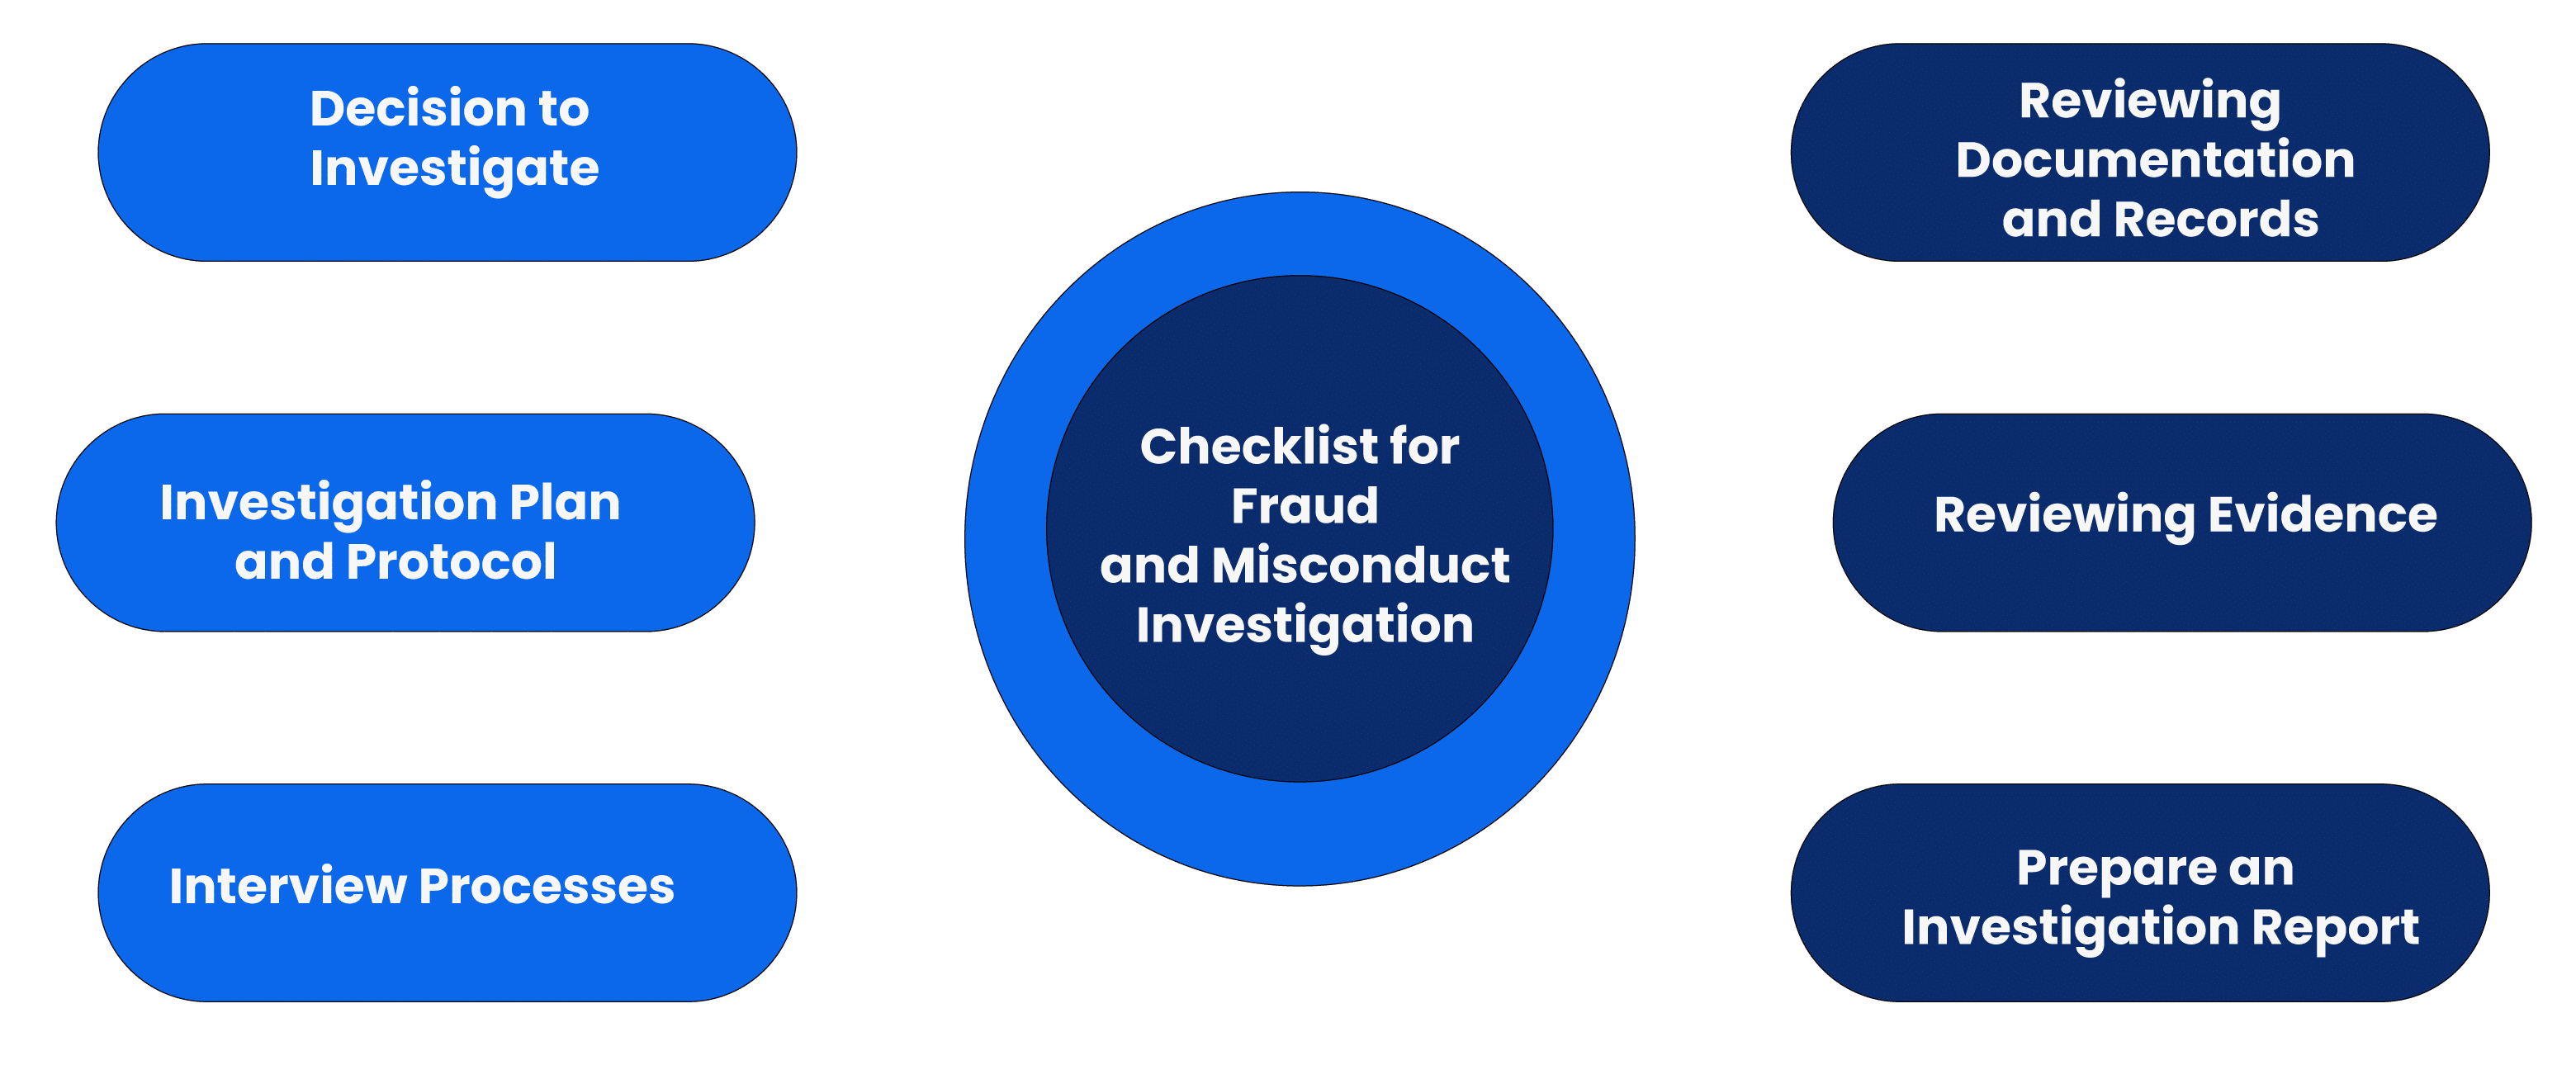 Checklist for Fraud and Misconduct Investigation